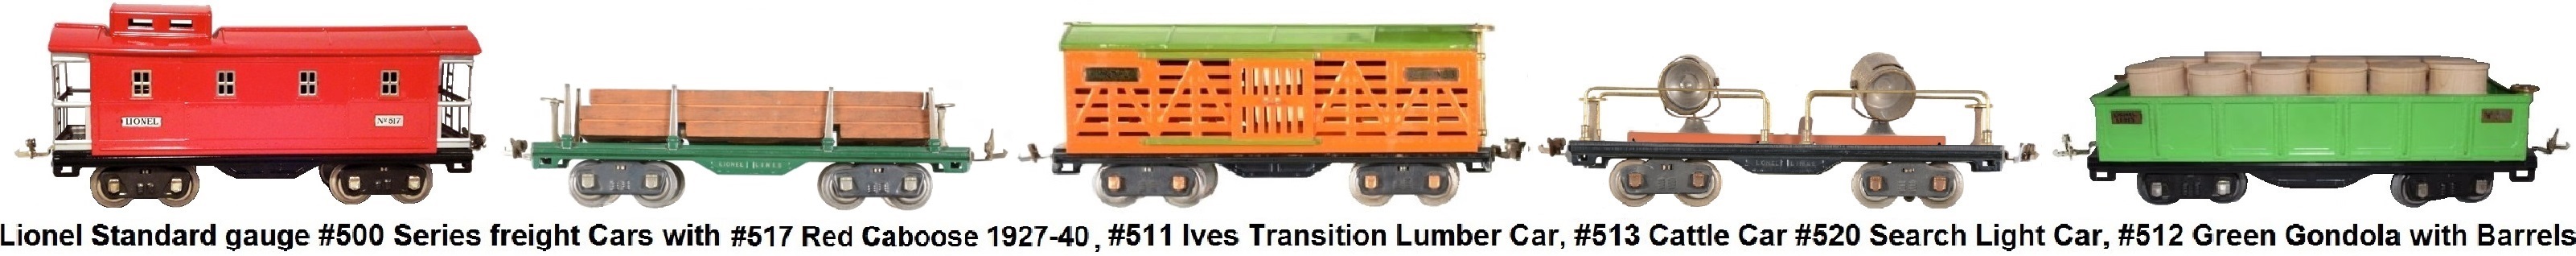 Lionel #500 series Standard gauge freights includes #517 Caboose, #511 Lumber car, #513 Cattle car, #520 Searchlight car, #512 gondola with barrels